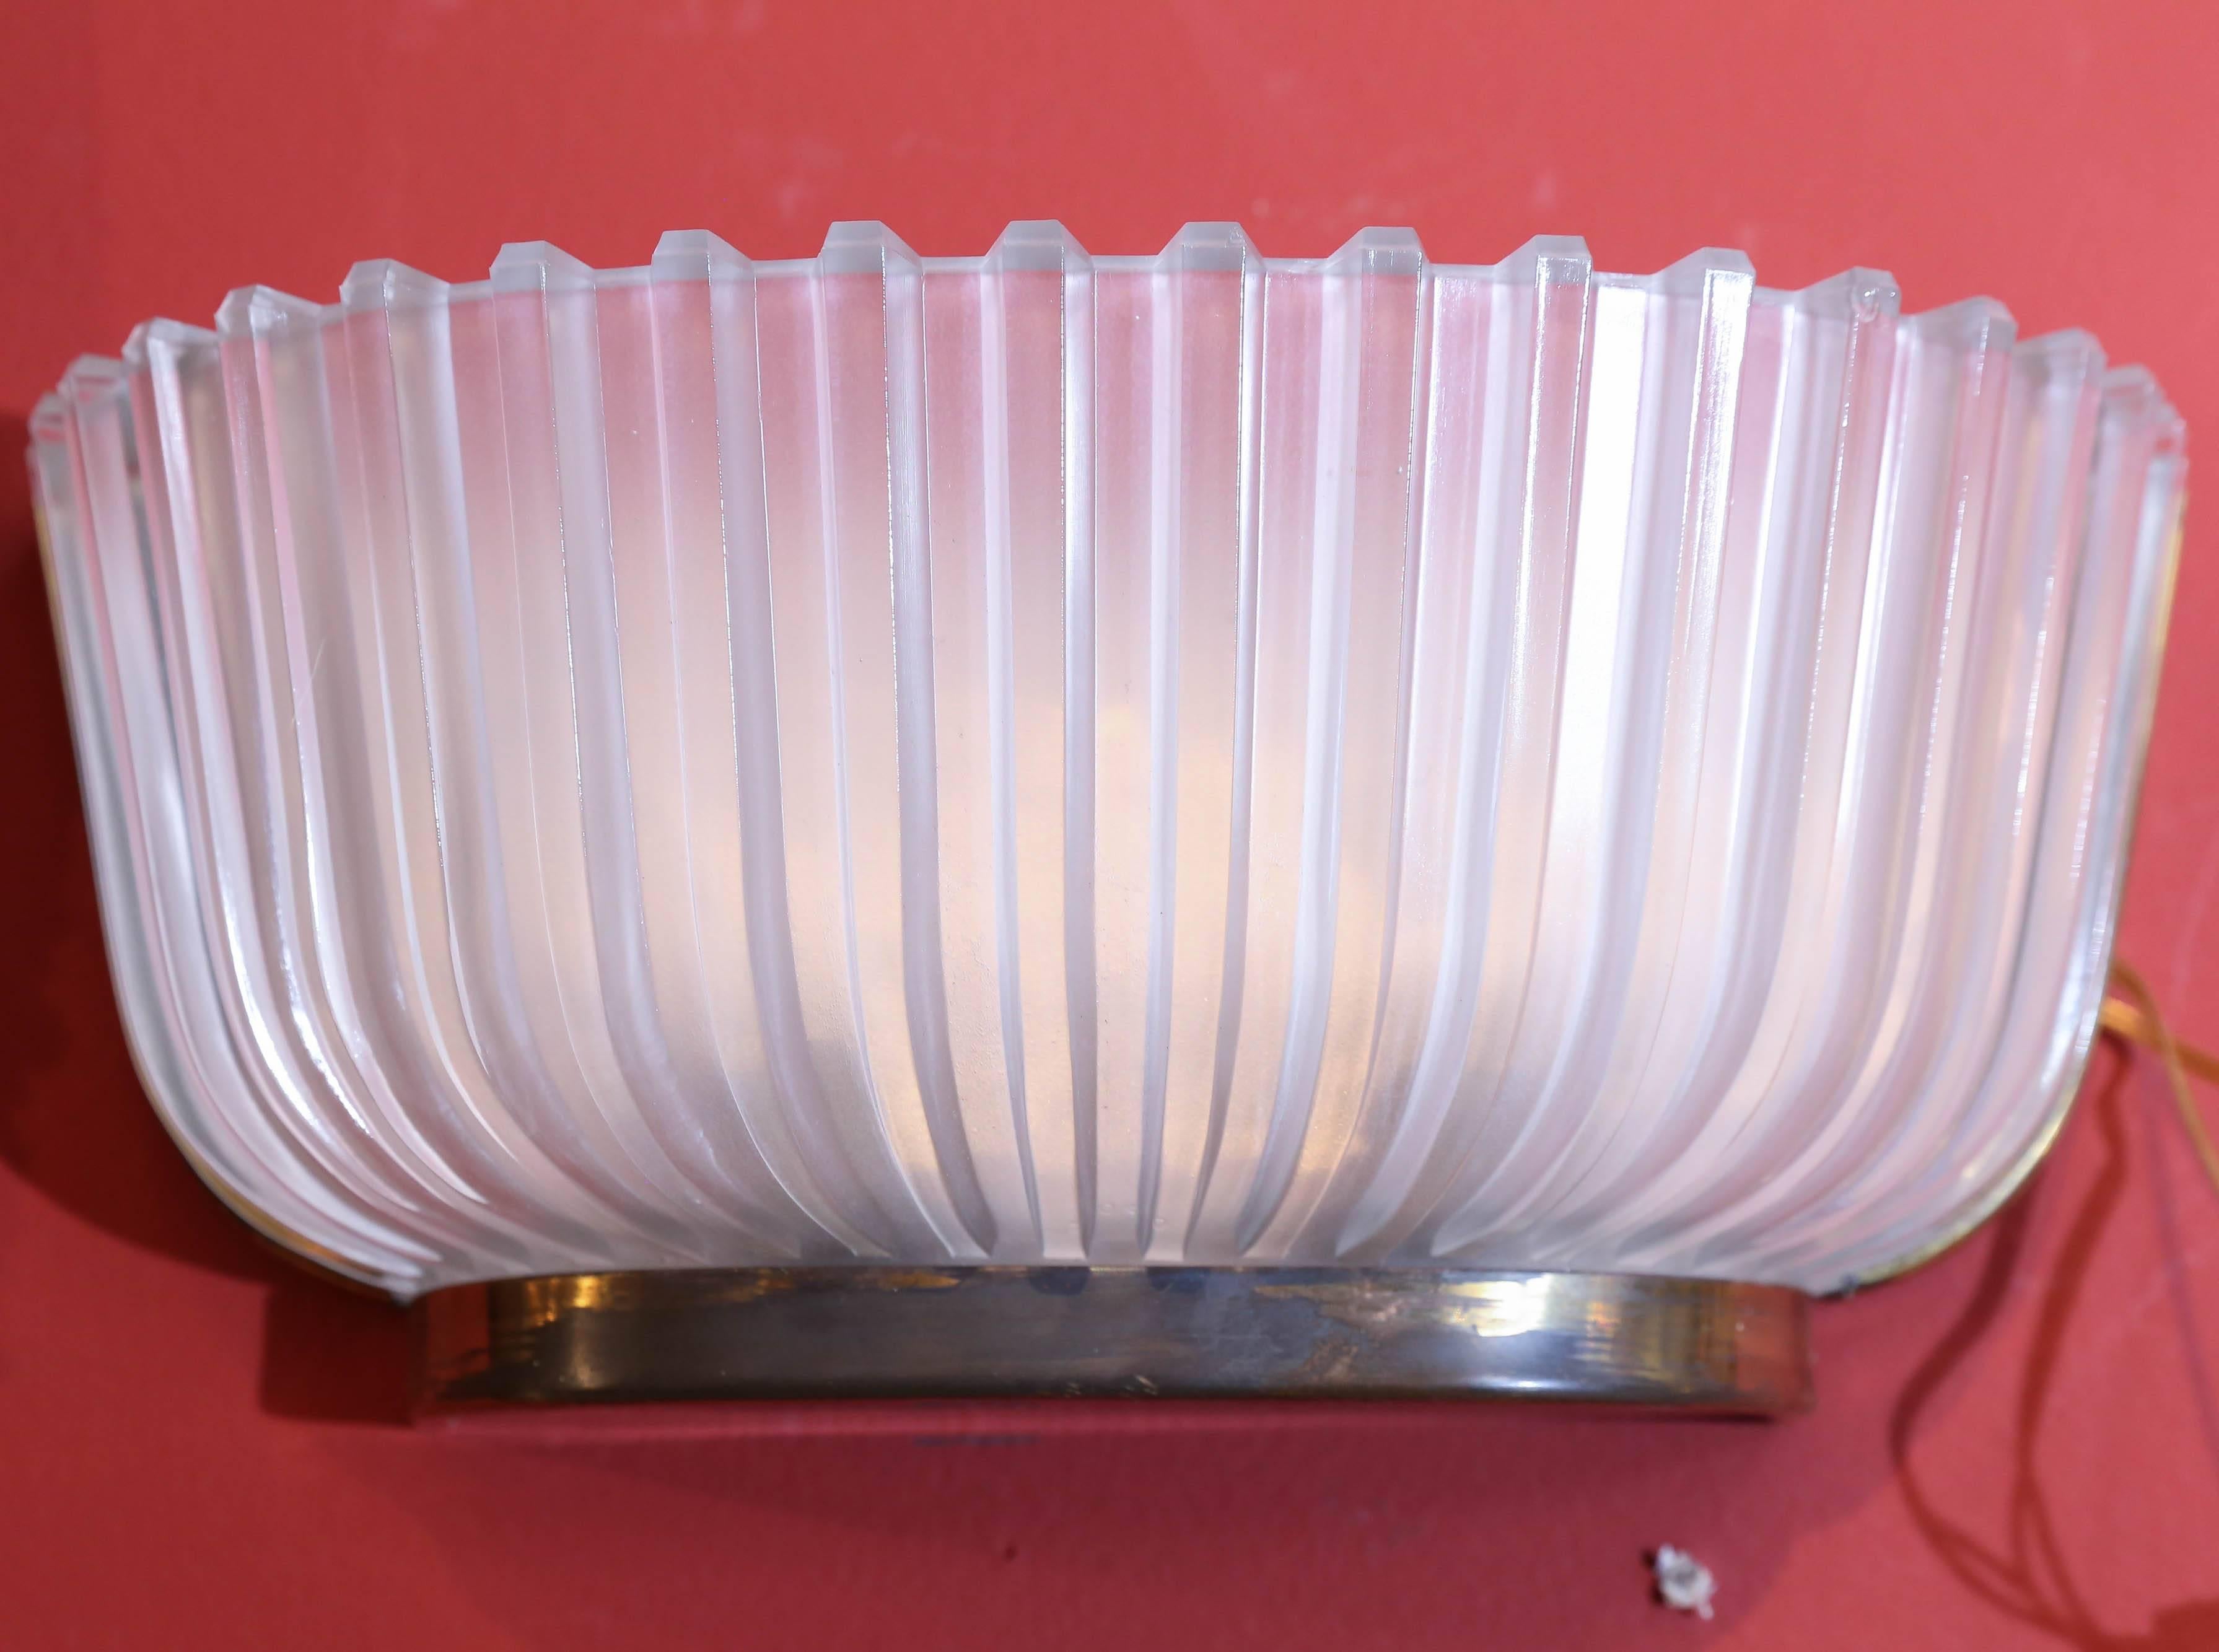 Art Deco glass wall sconces offered as a pair.
Contains two lights each sconce.